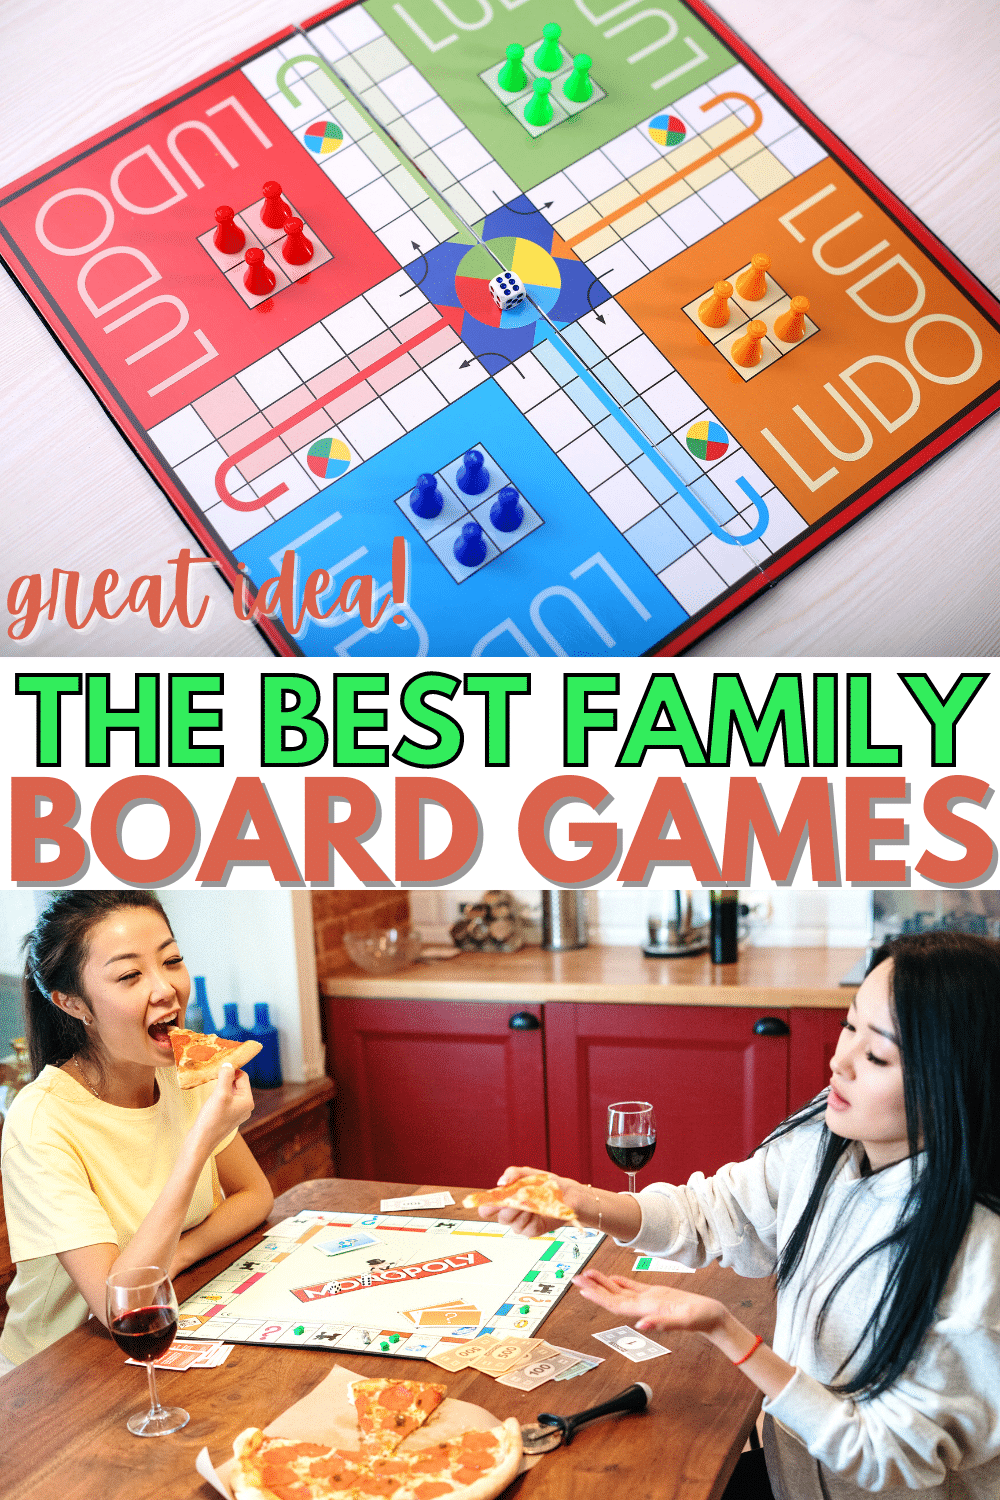 These are the best family board games for families with kids of all ages - tried, tested, and recommended by my family of six. #boardgames #familyfun #familygames #familytime via @wondermomwannab